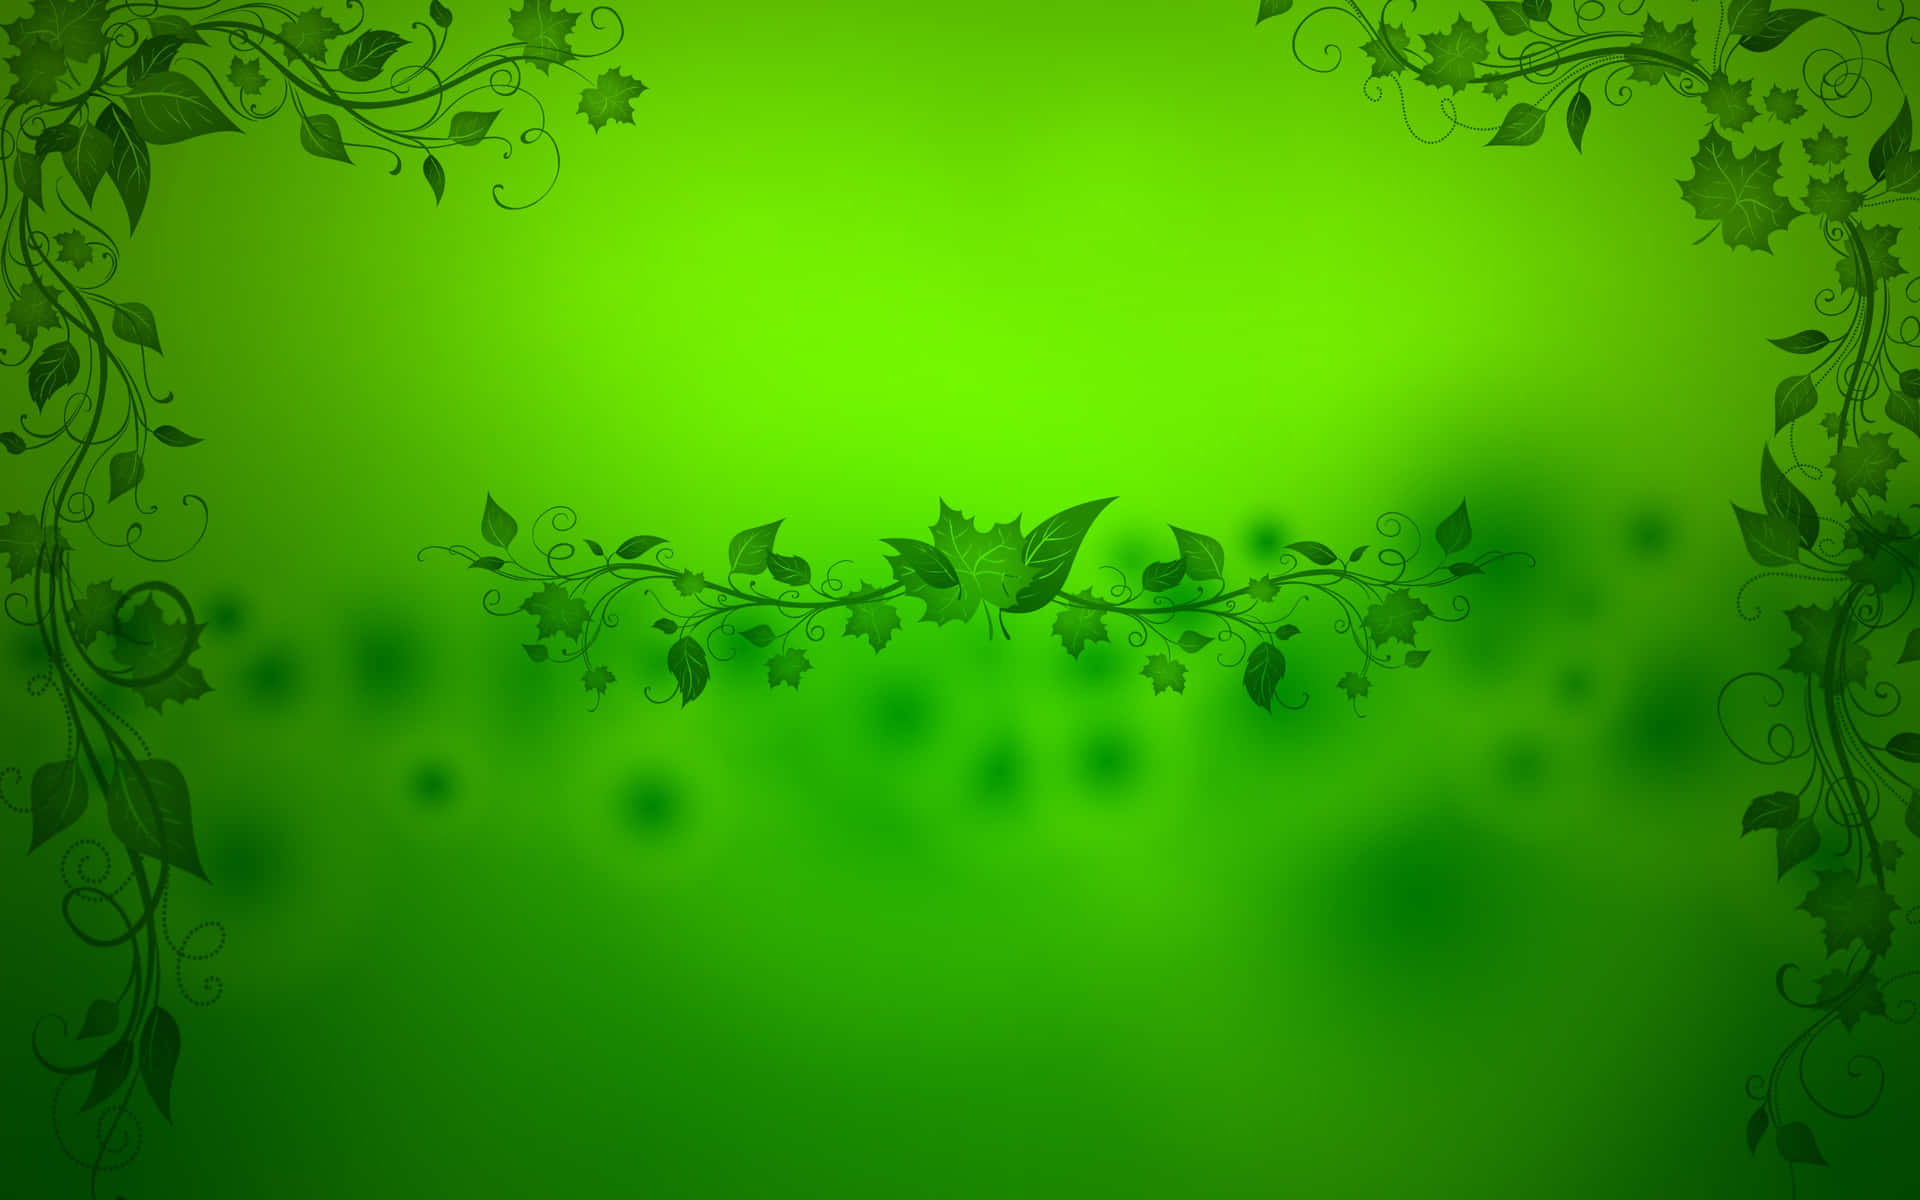 Get in touch with nature with this soothing green color background. Wallpaper